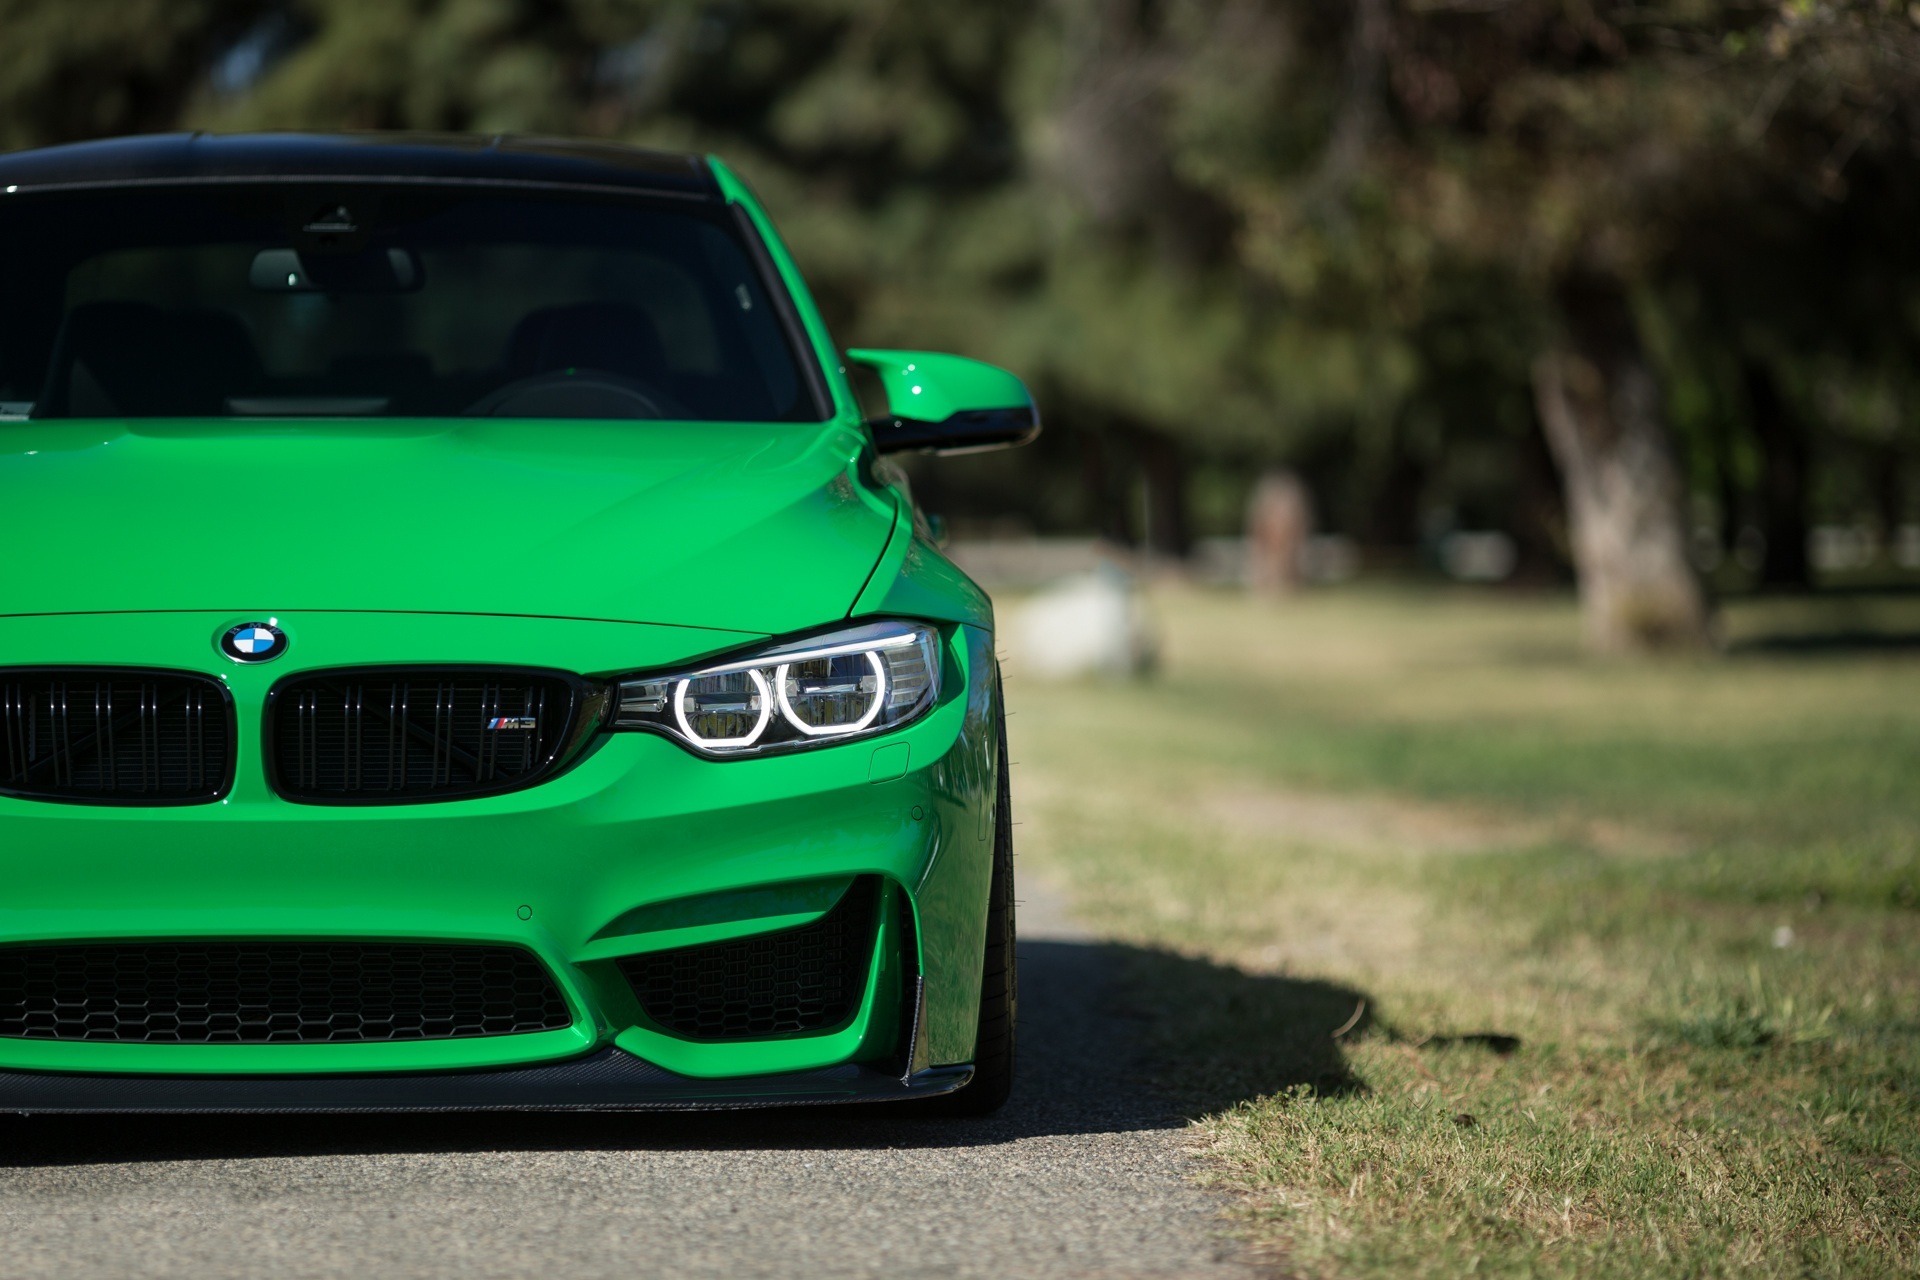 157259 download wallpaper green, cars, front view, bmw, m3, 2016 screensavers and pictures for free